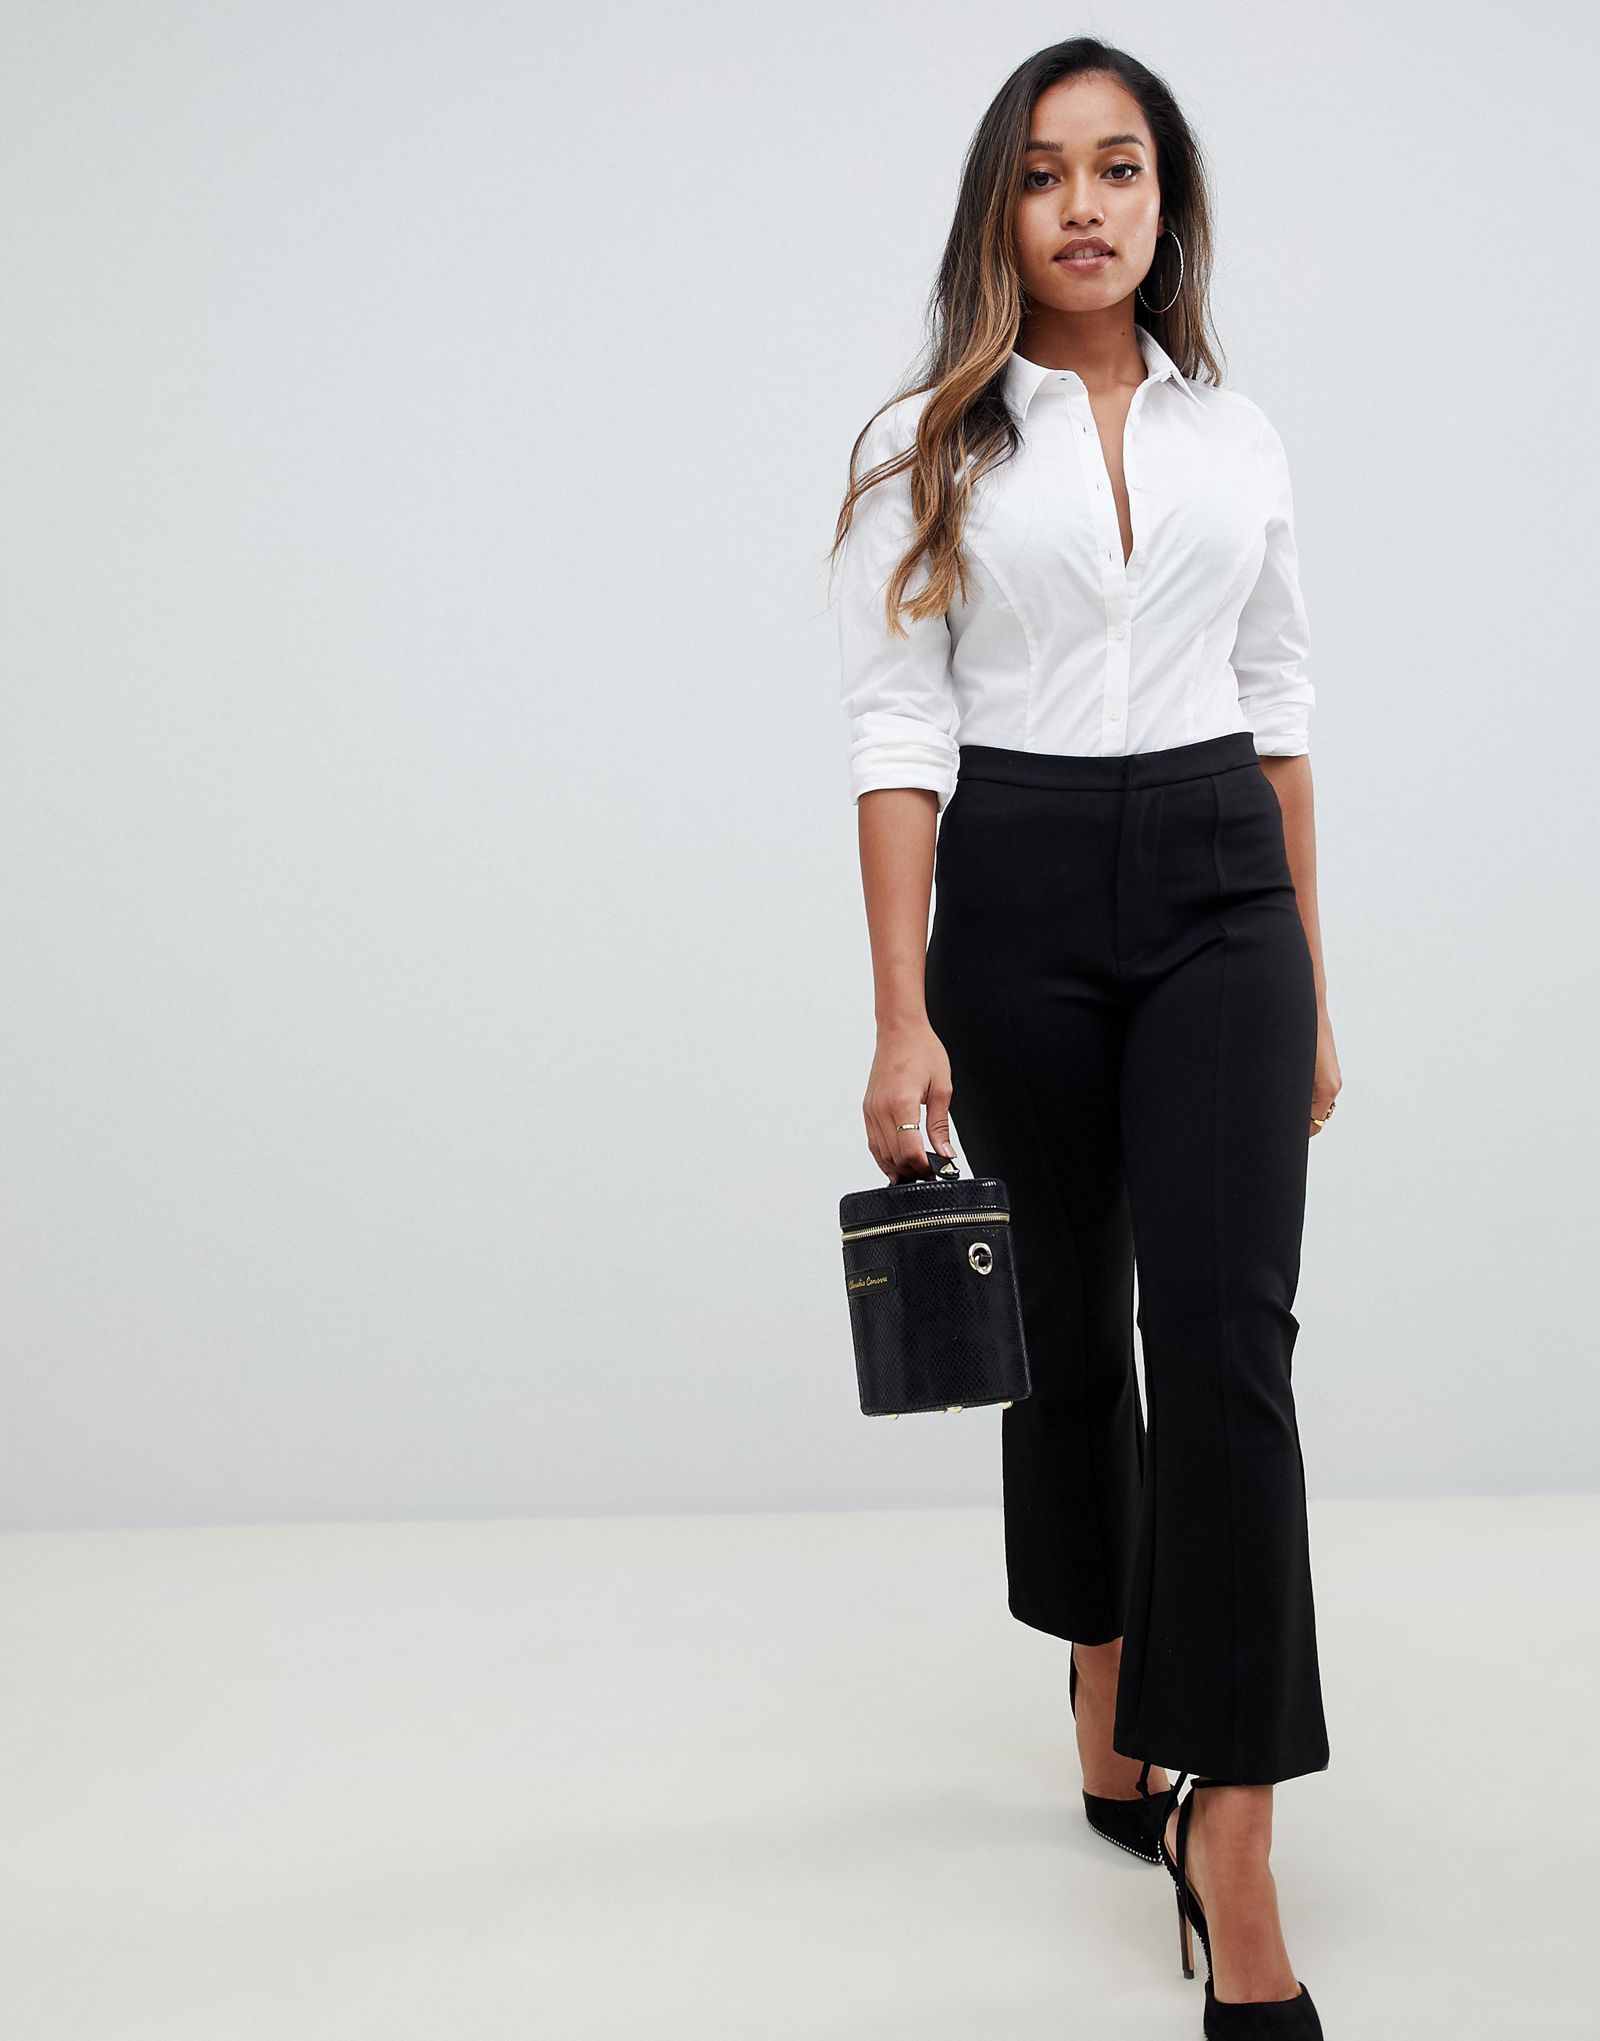 ASOS PETITE Fitted White Shirt